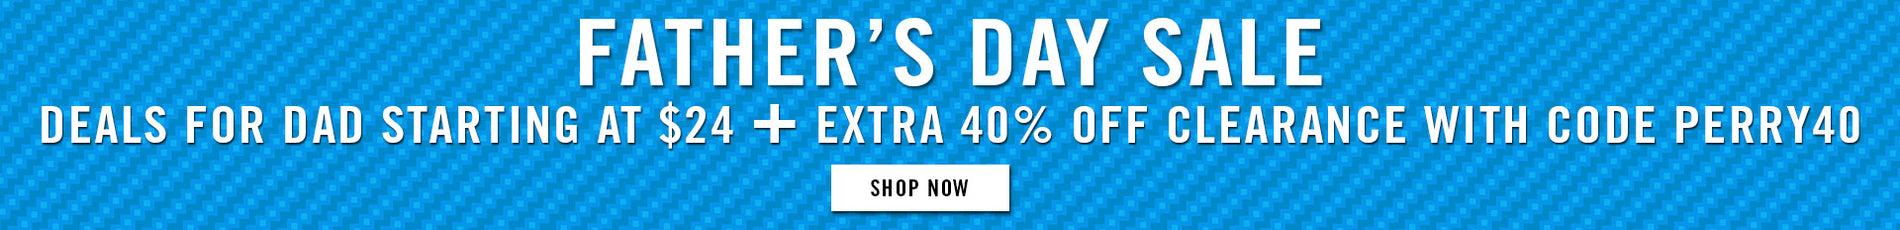 father's day sale sale deals starting at $24 + extra 40% off clearance with code PERRY40 - SHOP NOW